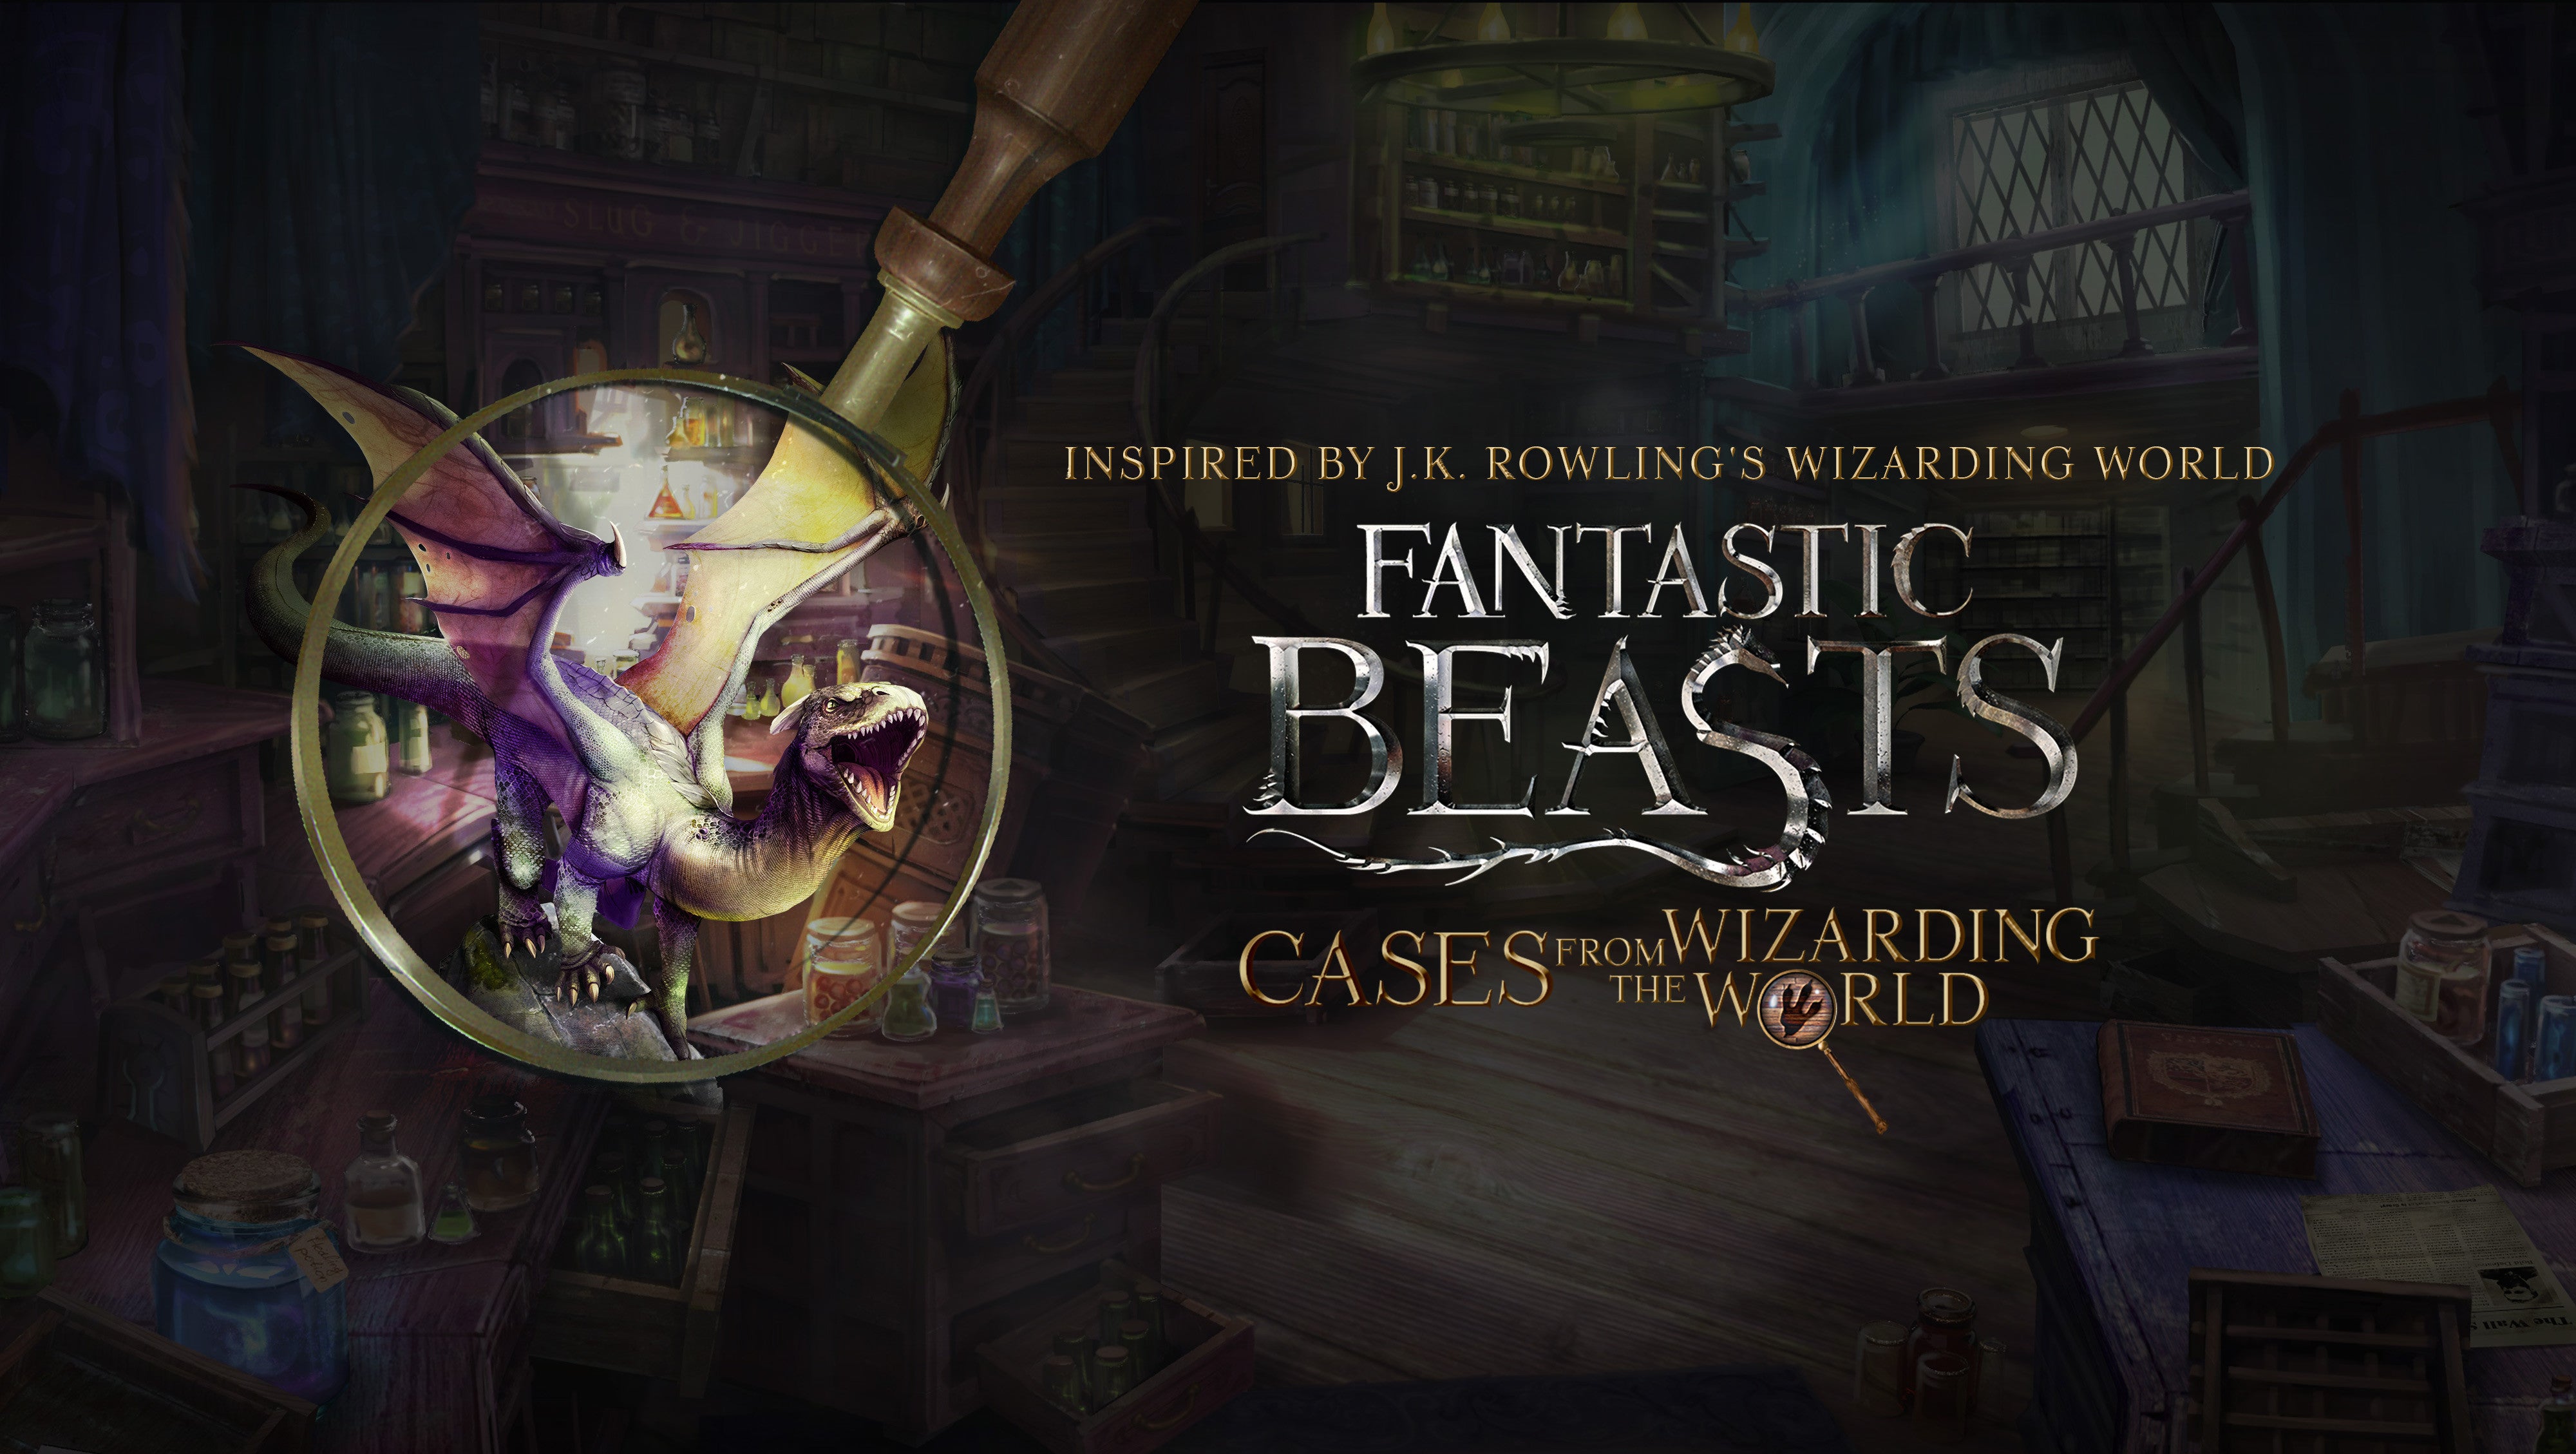 Fantastic Beasts mobile game unleashed on iOS and Android